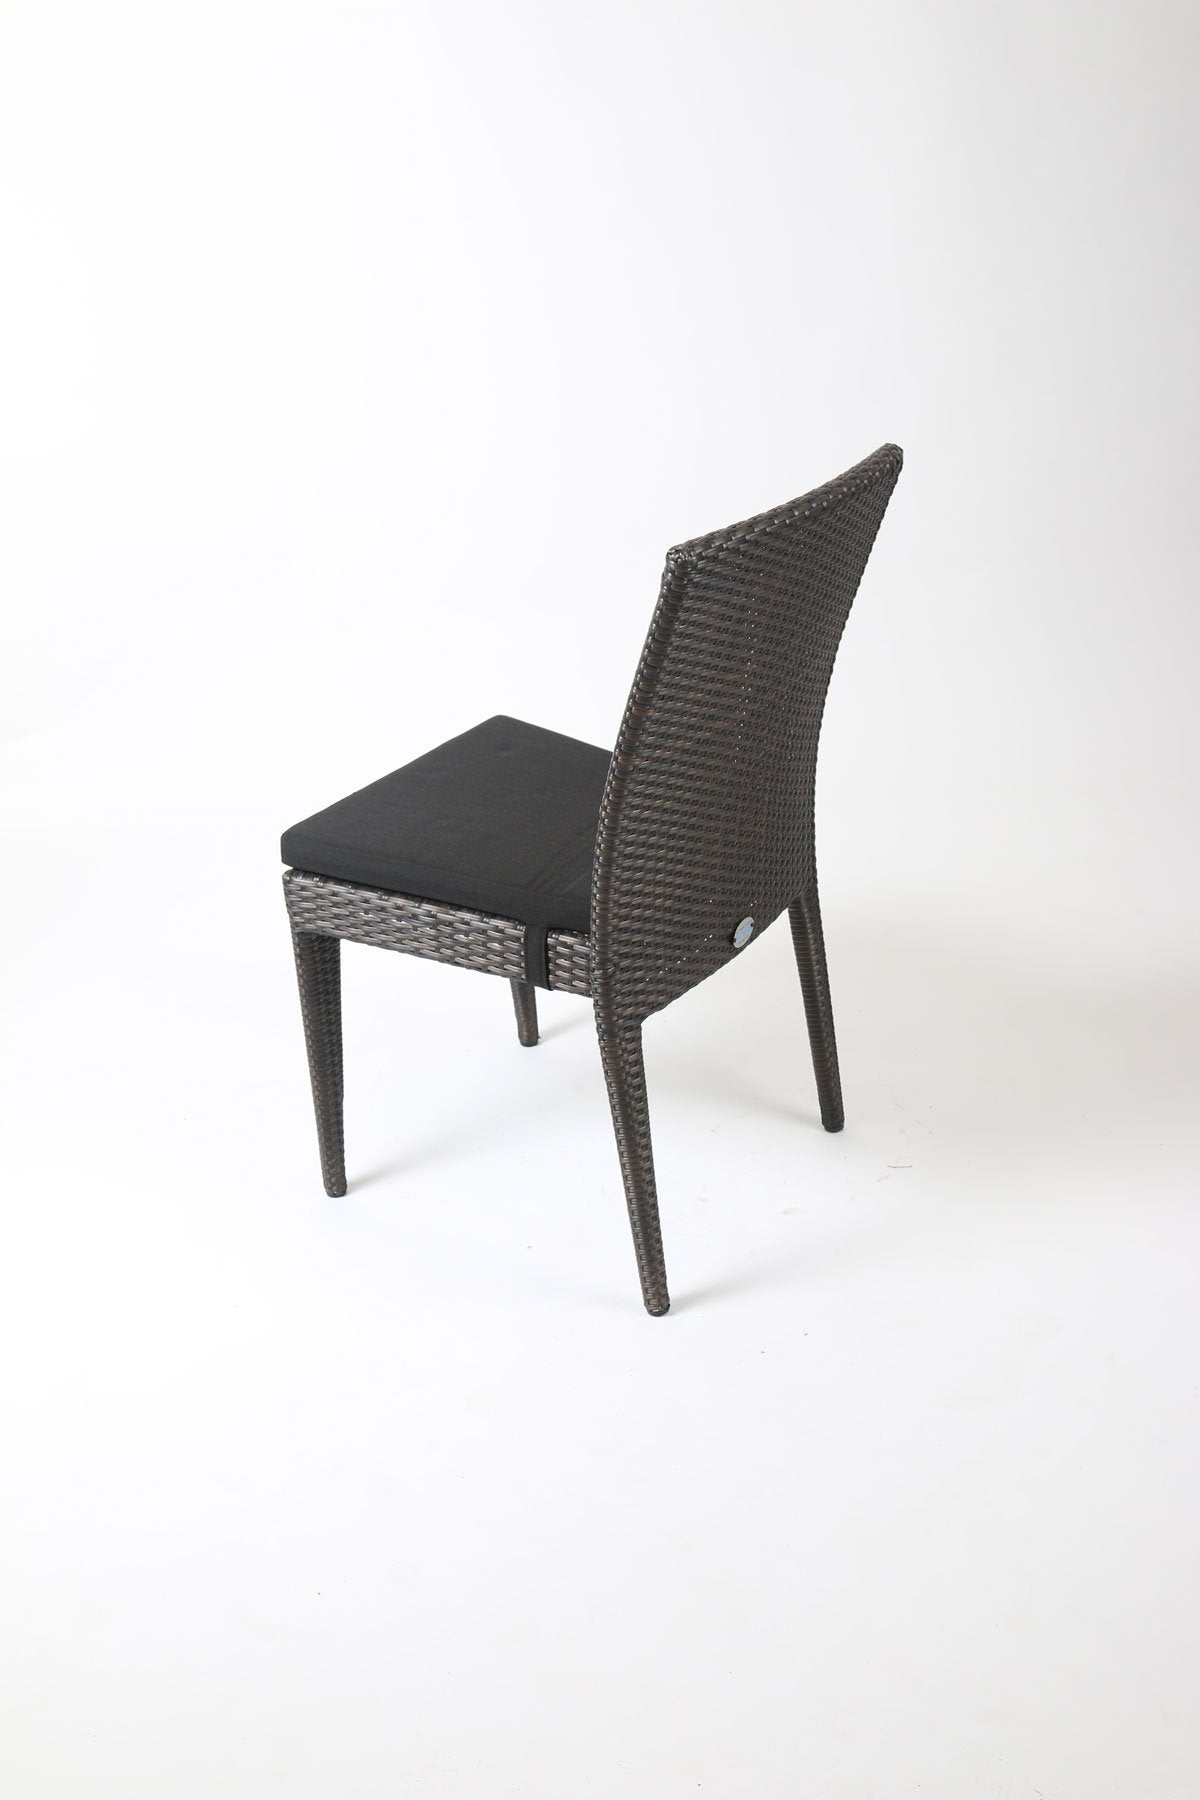 Outdoor Java Brown Wicker Dining Chair with Black Cushion